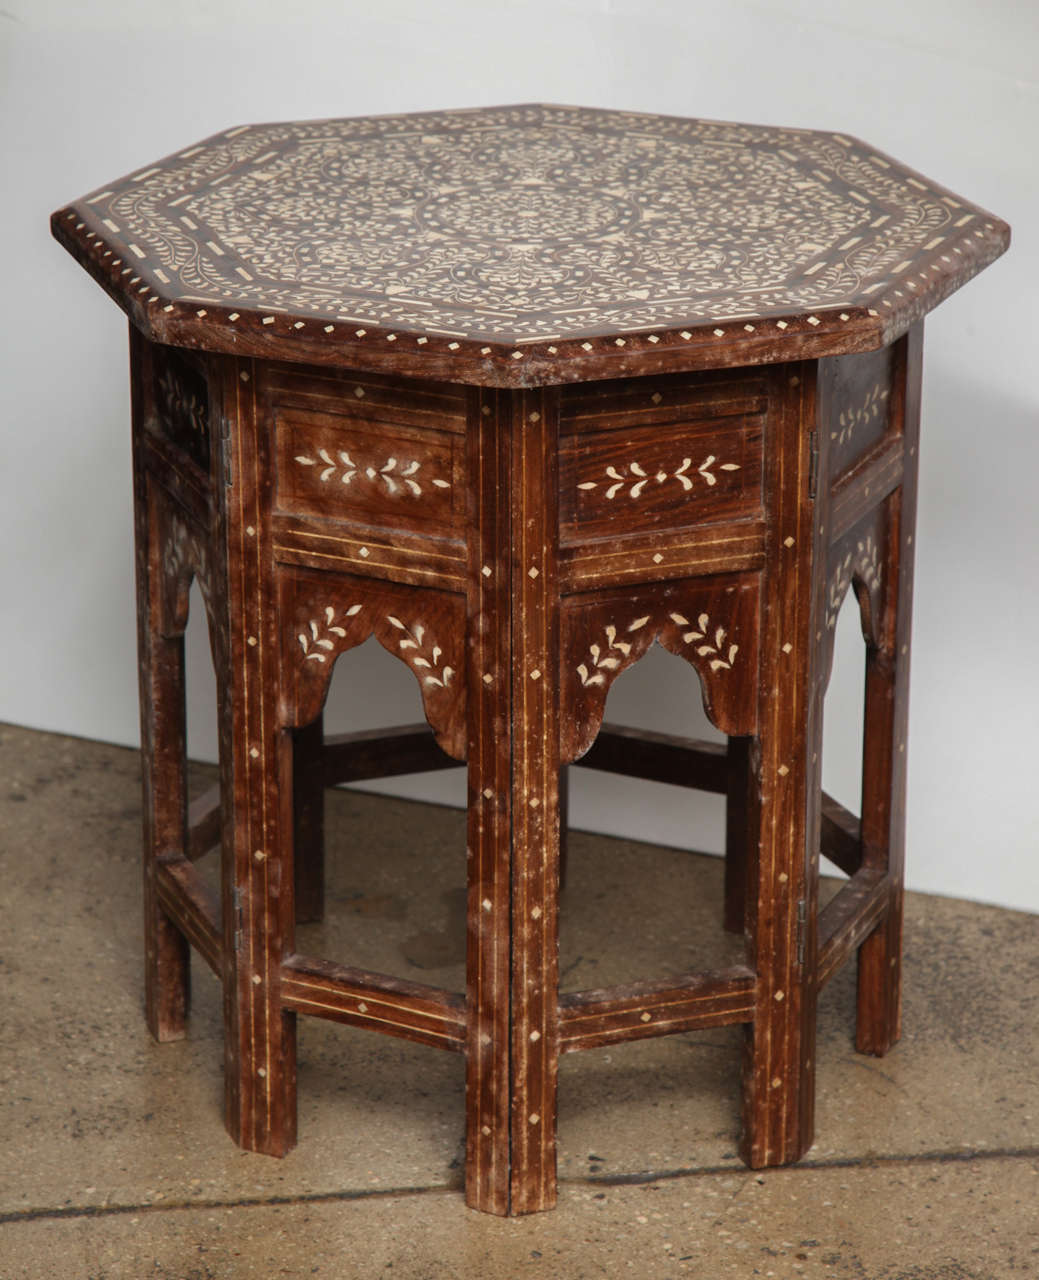 A small octagonal side table with a classic bone inlay pattern, from India.  Folding base.